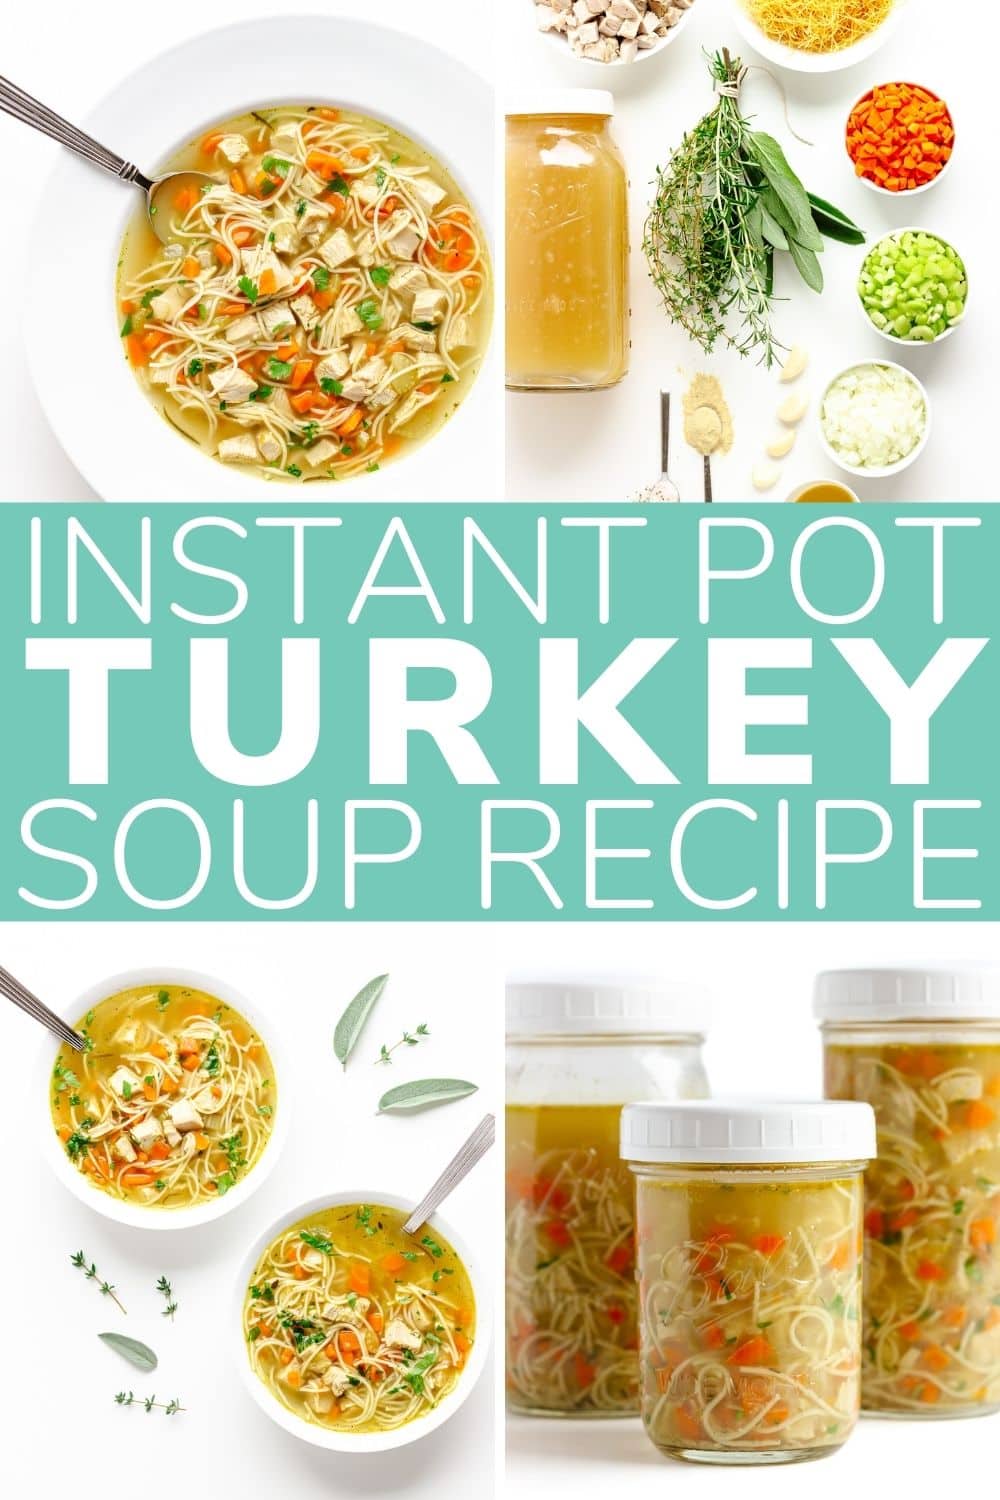 Pinterest collage graphic with text overlay "Instant Pot Turkey Soup Recipe".